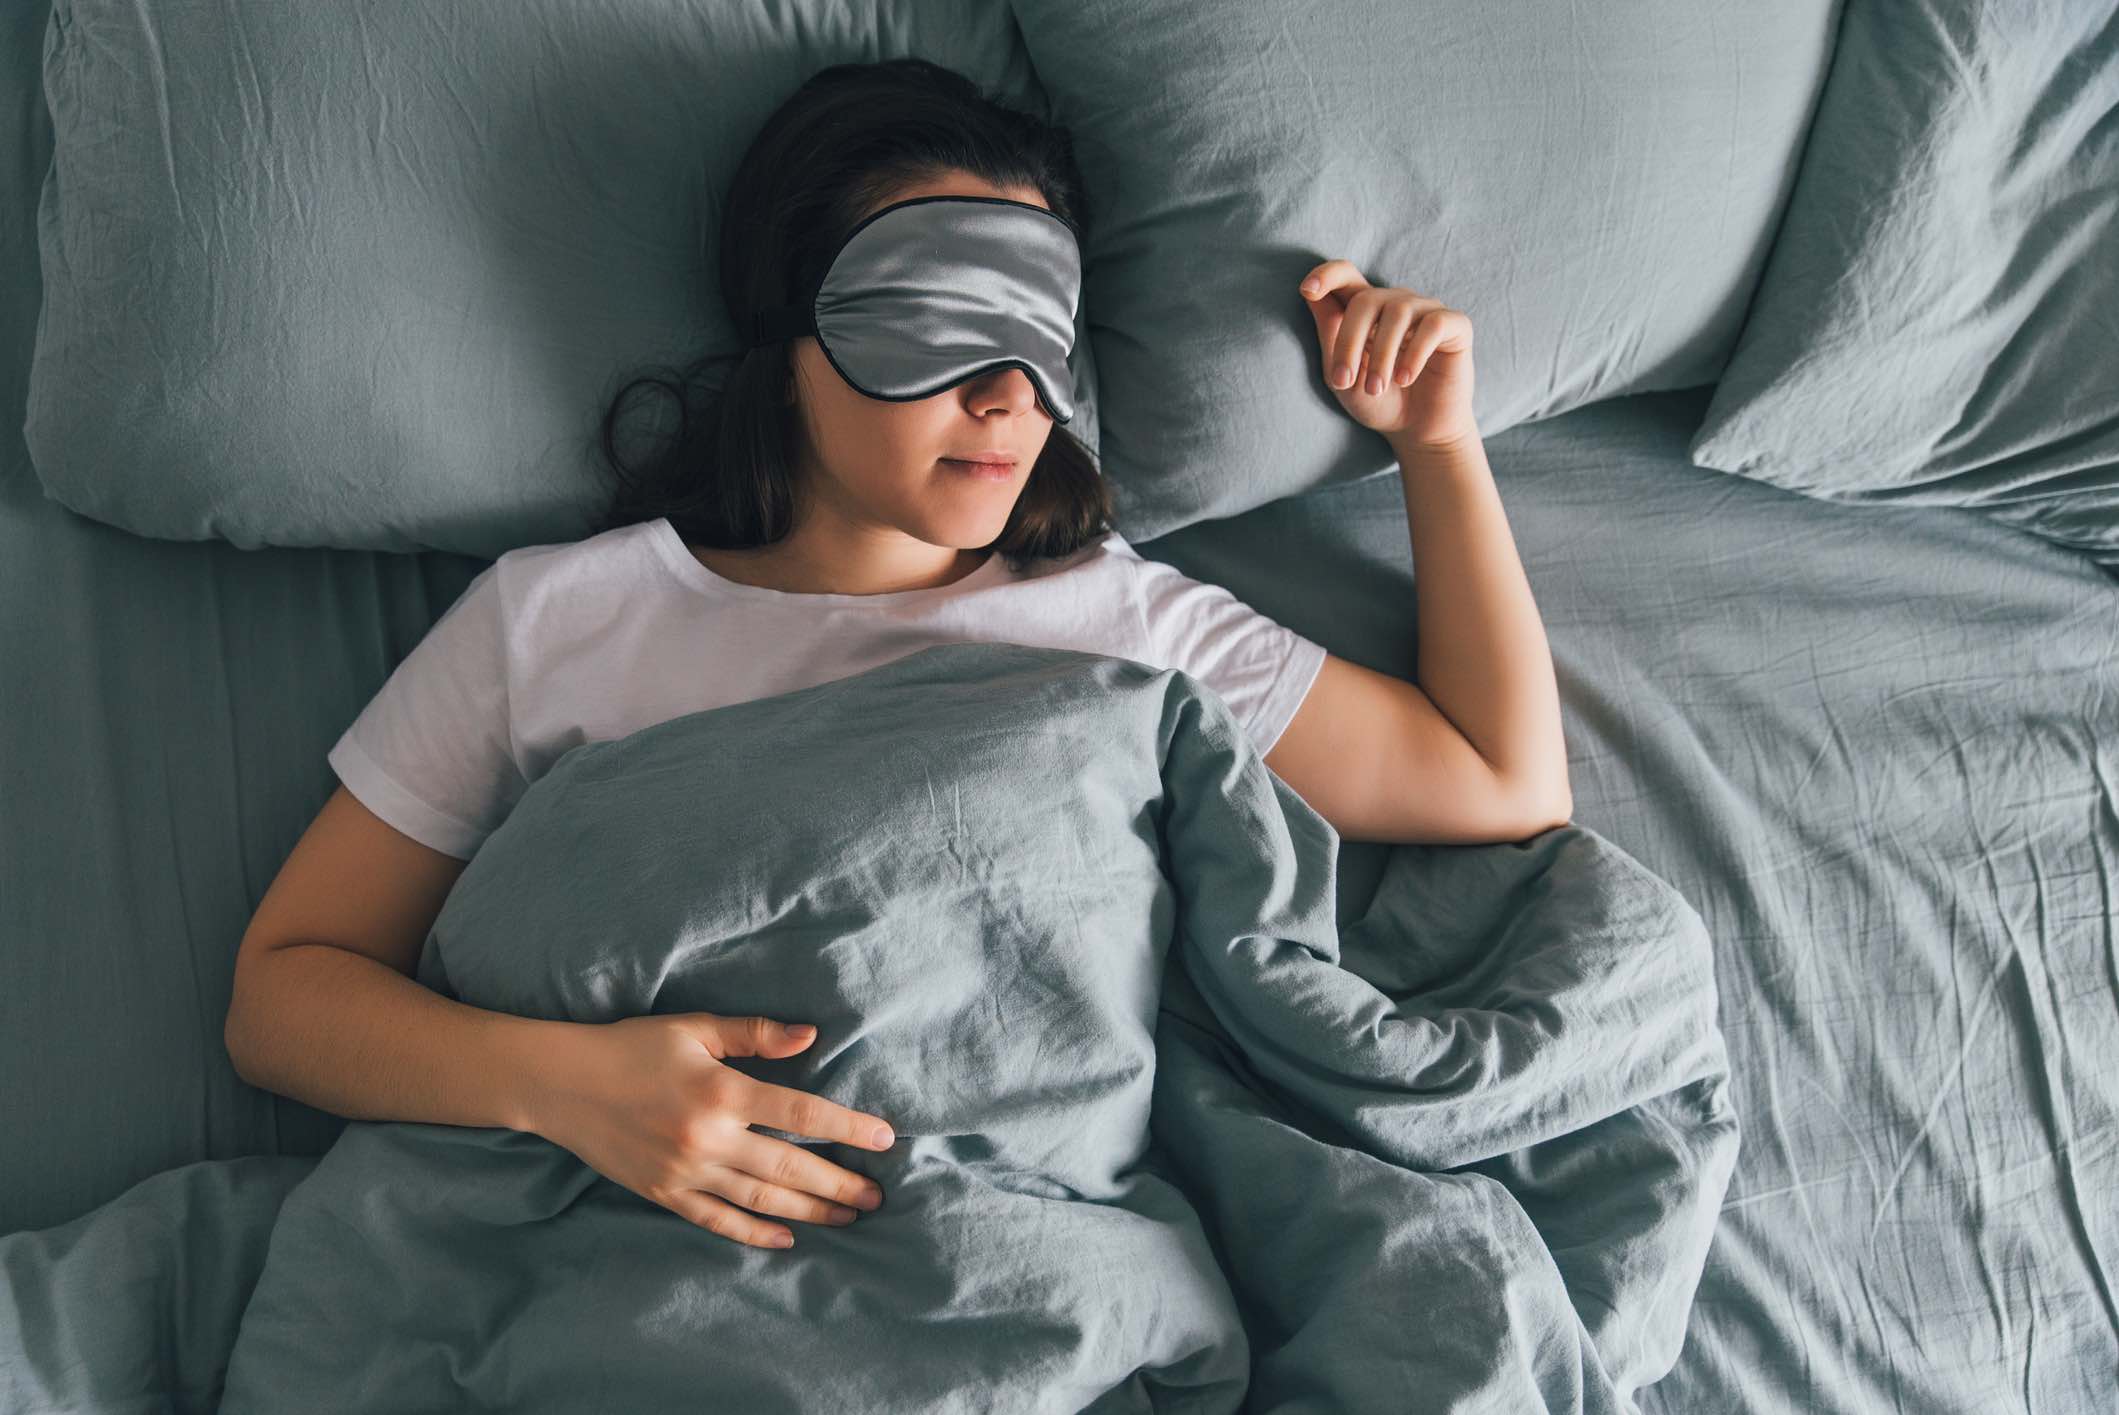 A full-proof plan for a good night’s sleep